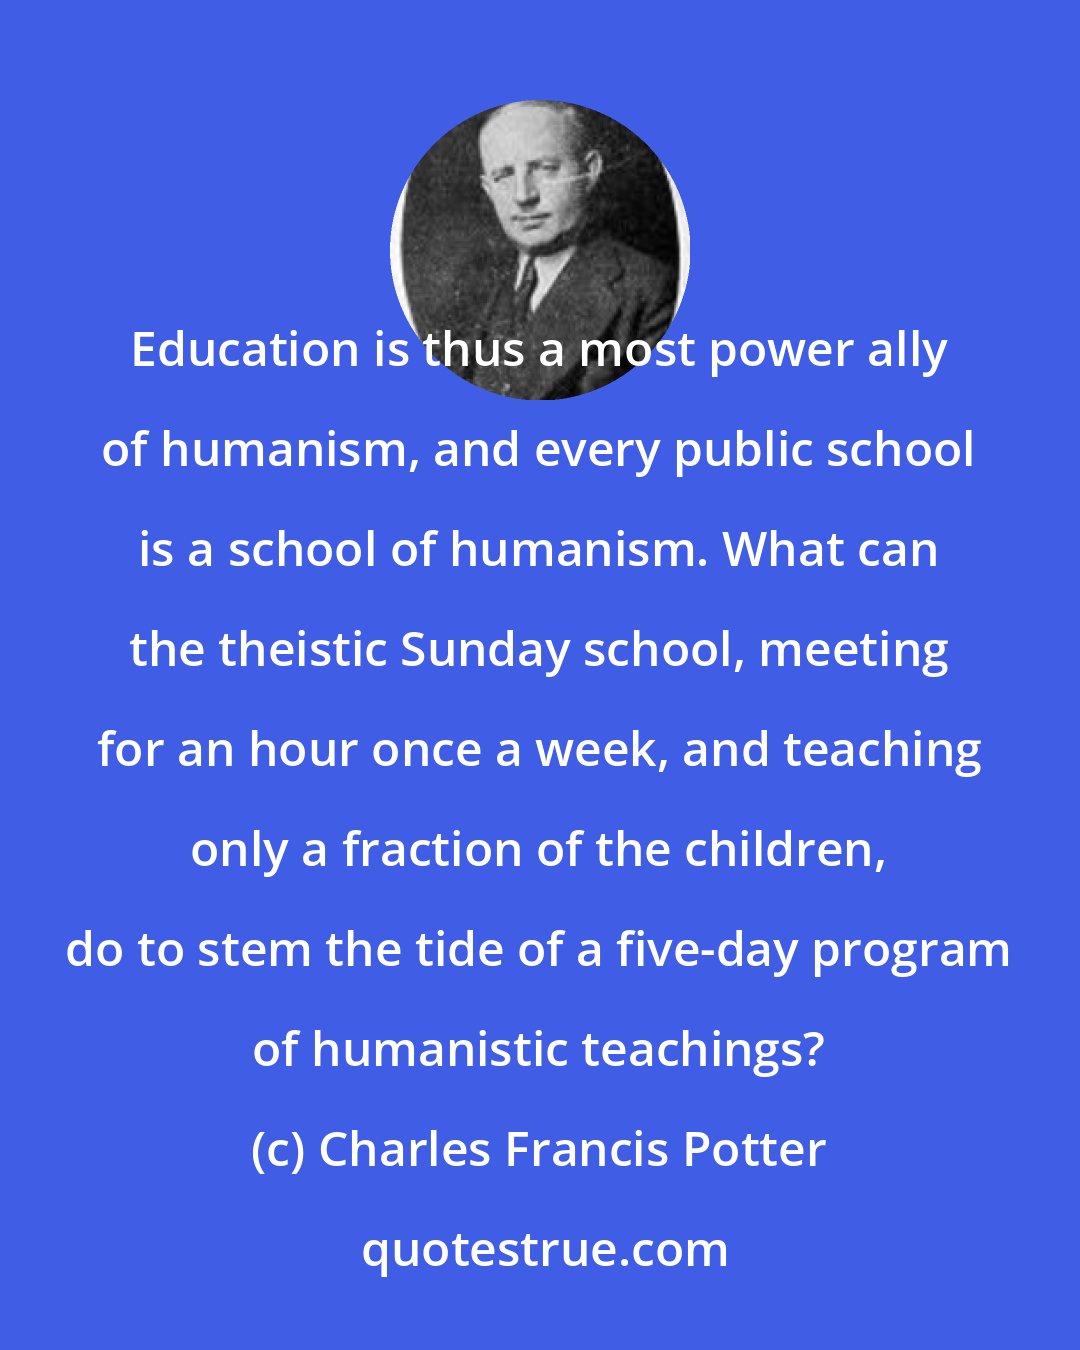 Charles Francis Potter: Education is thus a most power ally of humanism, and every public school is a school of humanism. What can the theistic Sunday school, meeting for an hour once a week, and teaching only a fraction of the children, do to stem the tide of a five-day program of humanistic teachings?